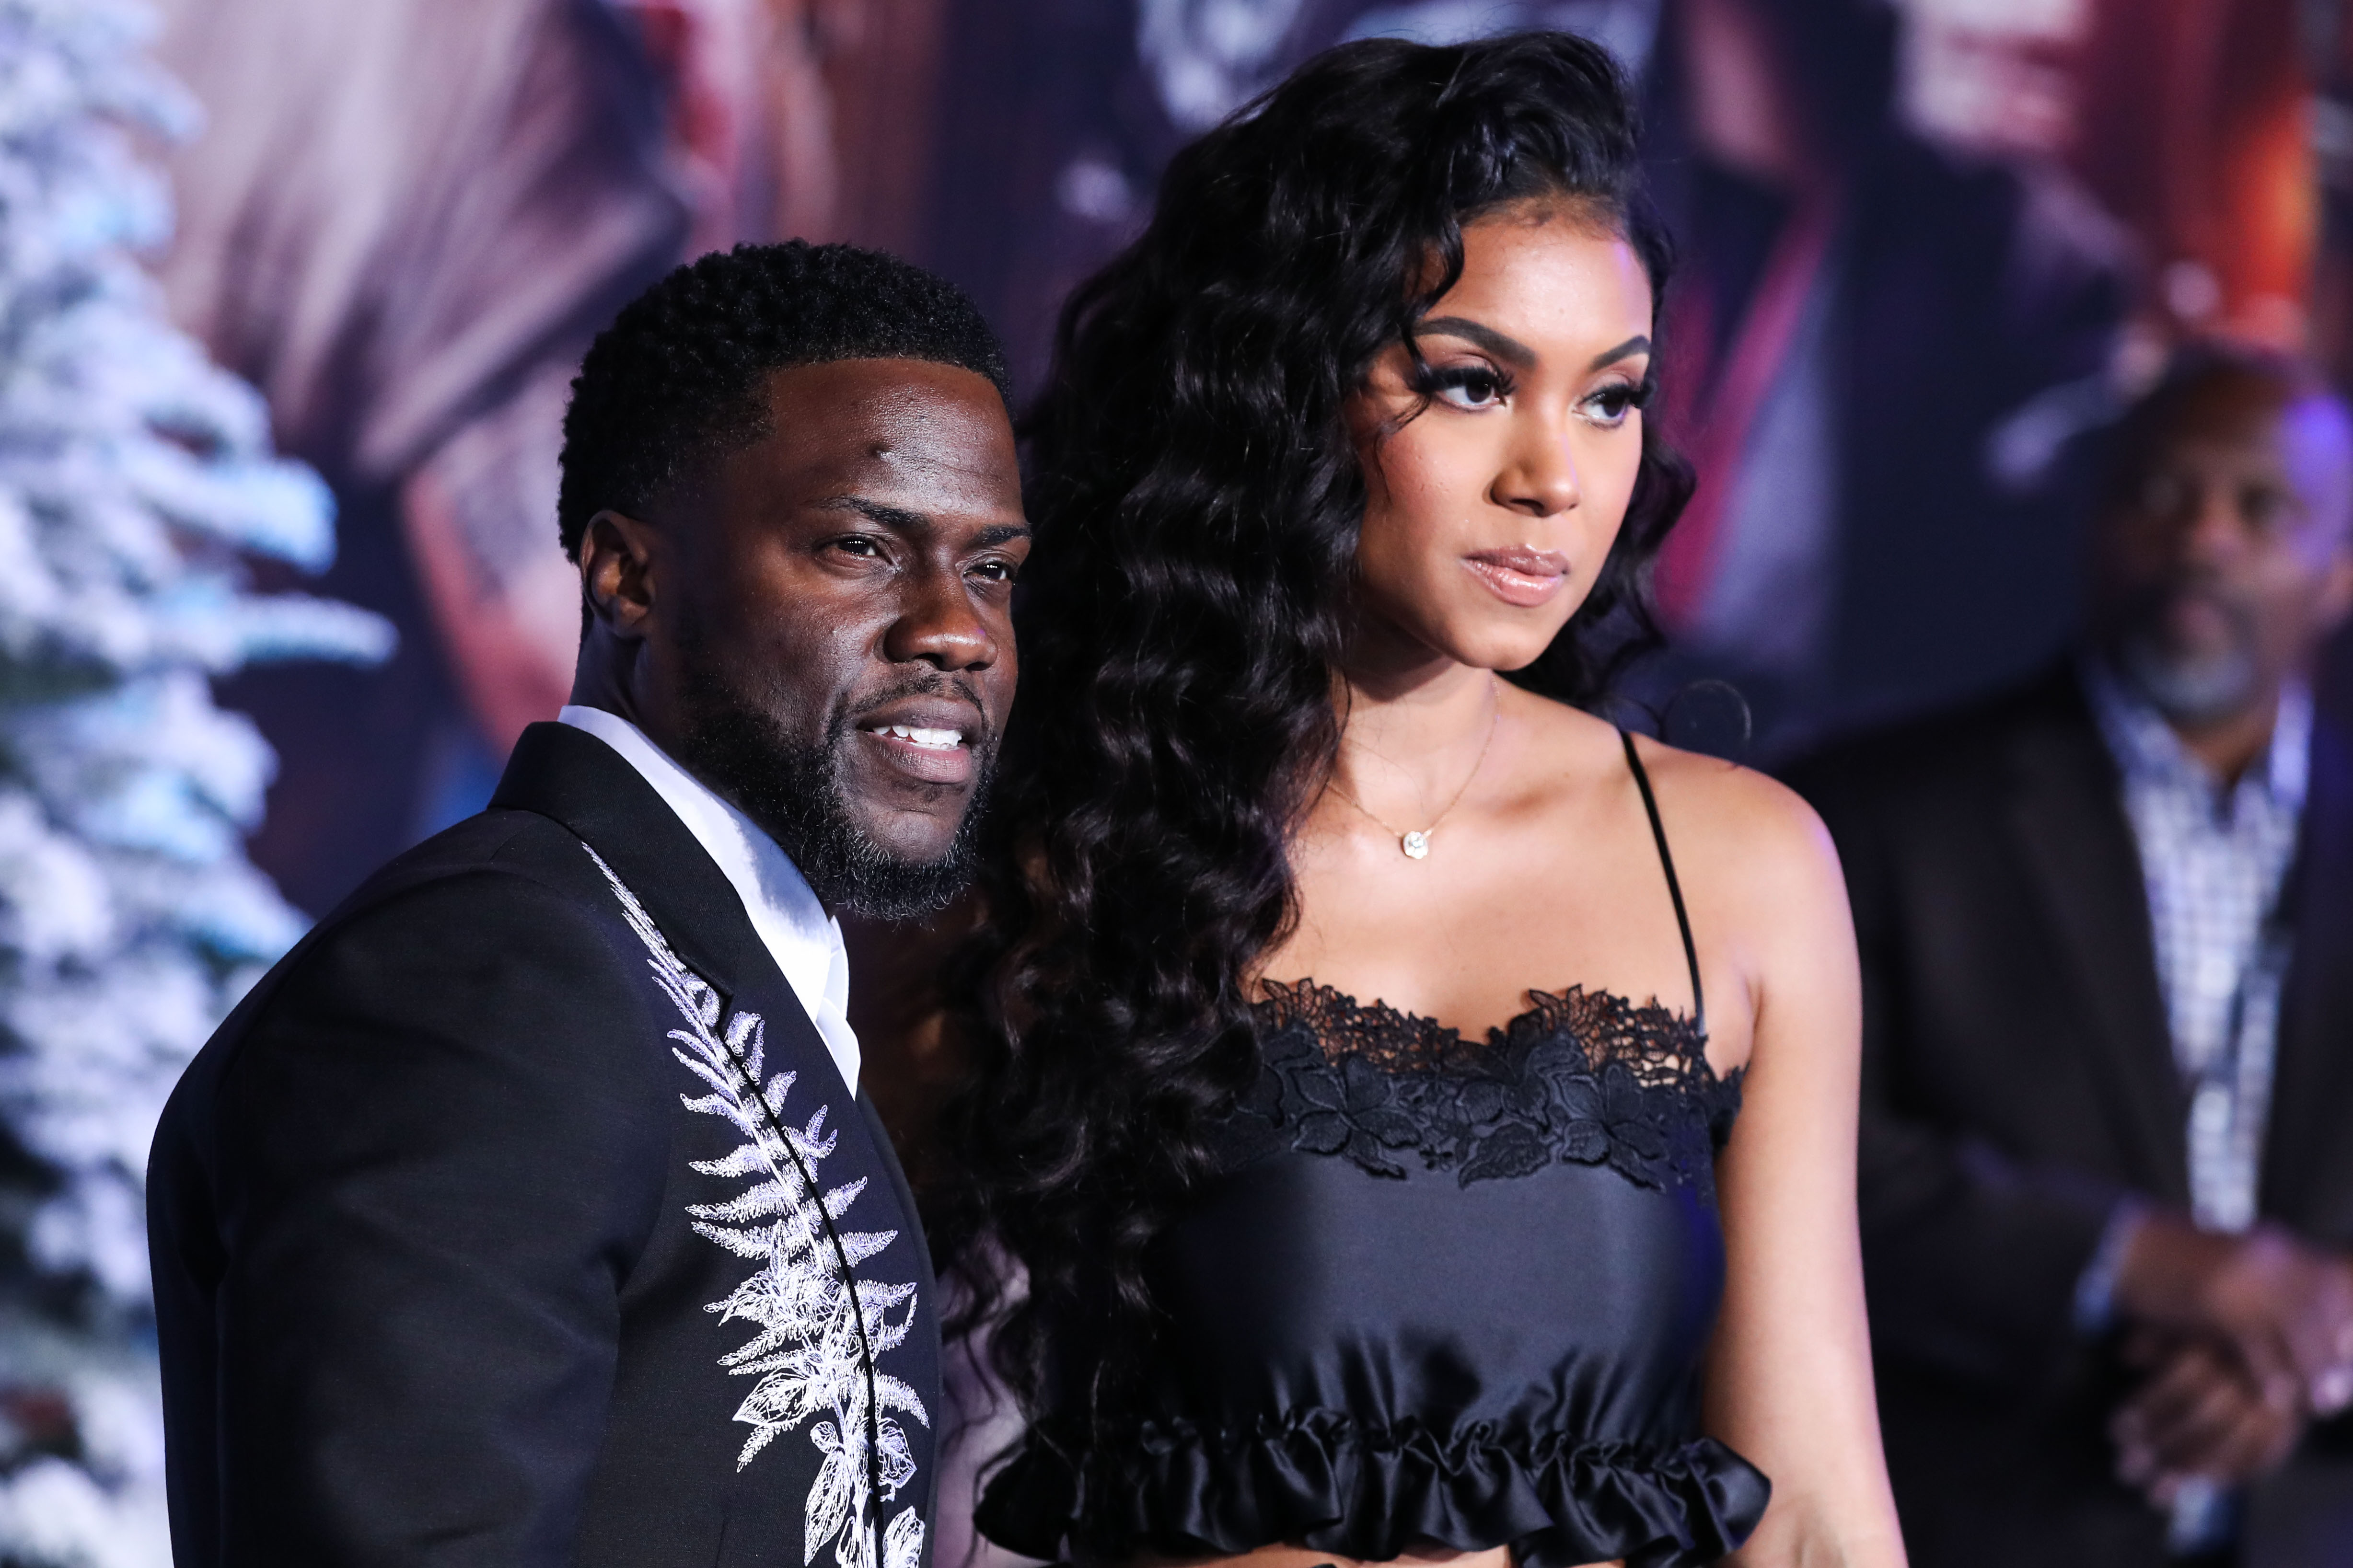 Actor Kevin Hart and wife Eniko Parrish arrive at the World Premiere Of Columbia Pictures' 'Jumanji: The Next Level' held at the TCL Chinese Theatre IMAX on December 9, 2019 in Hollywood, Los Angeles, California, United States.